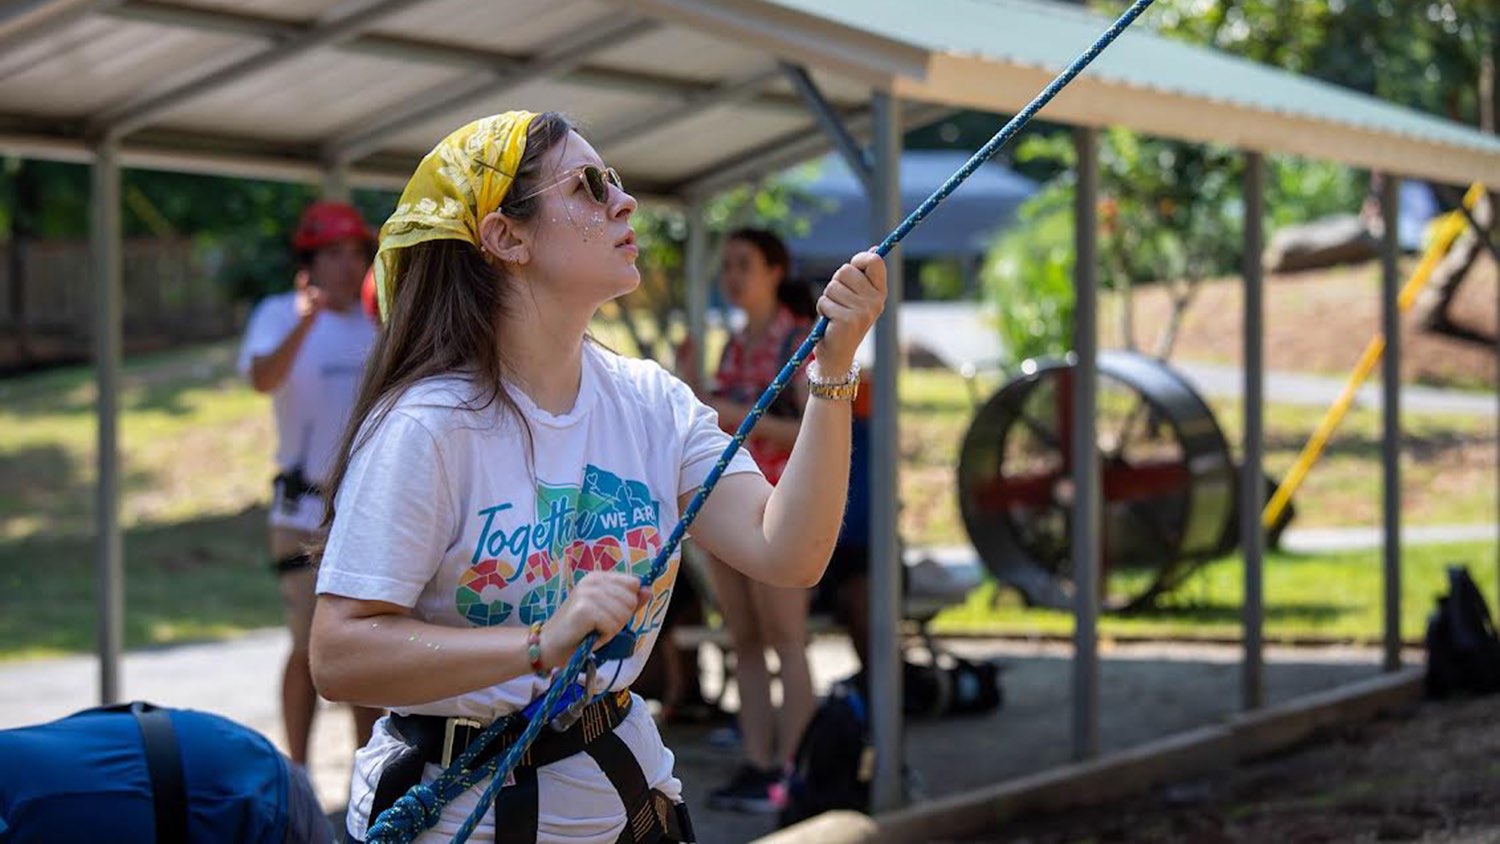 Cailsen Lackey holds a climbing rope - Cailsen Lackey Provides Inclusive Summer Camp Experiences - College of Natural Resources at NC State University